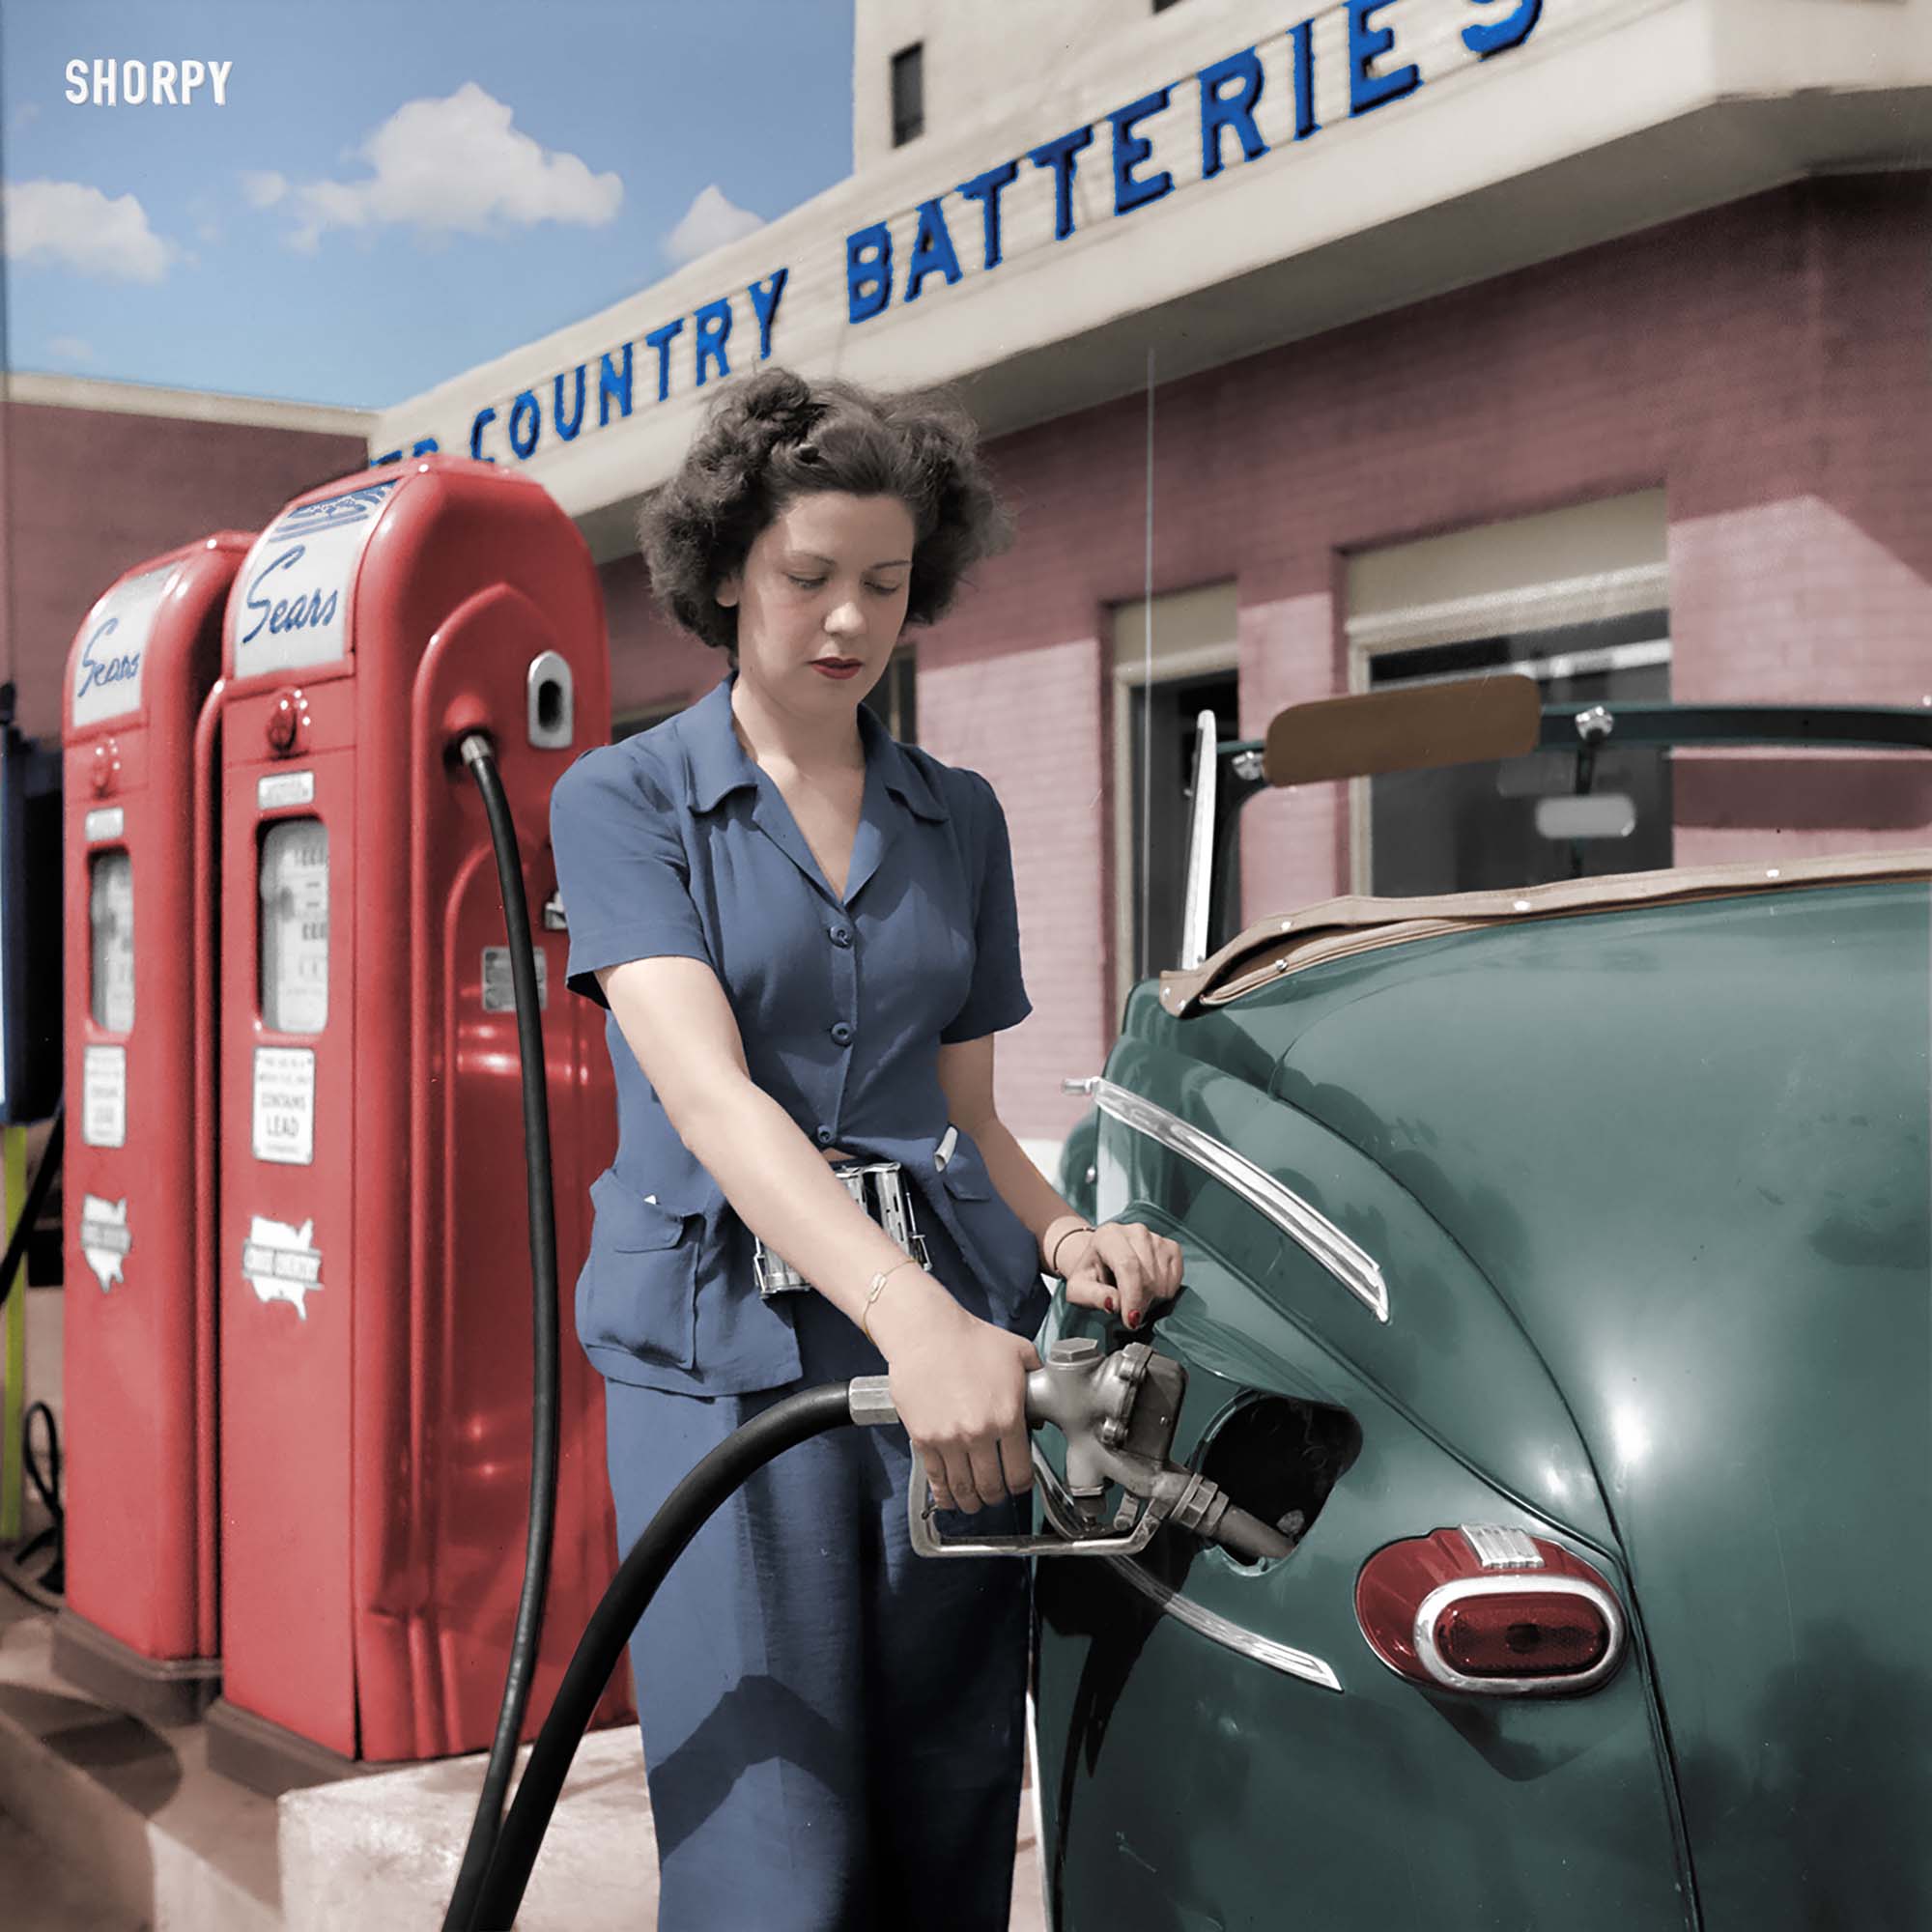 Here is my version of this Shorpy photo. I never knew that Sears sold gasoline.
